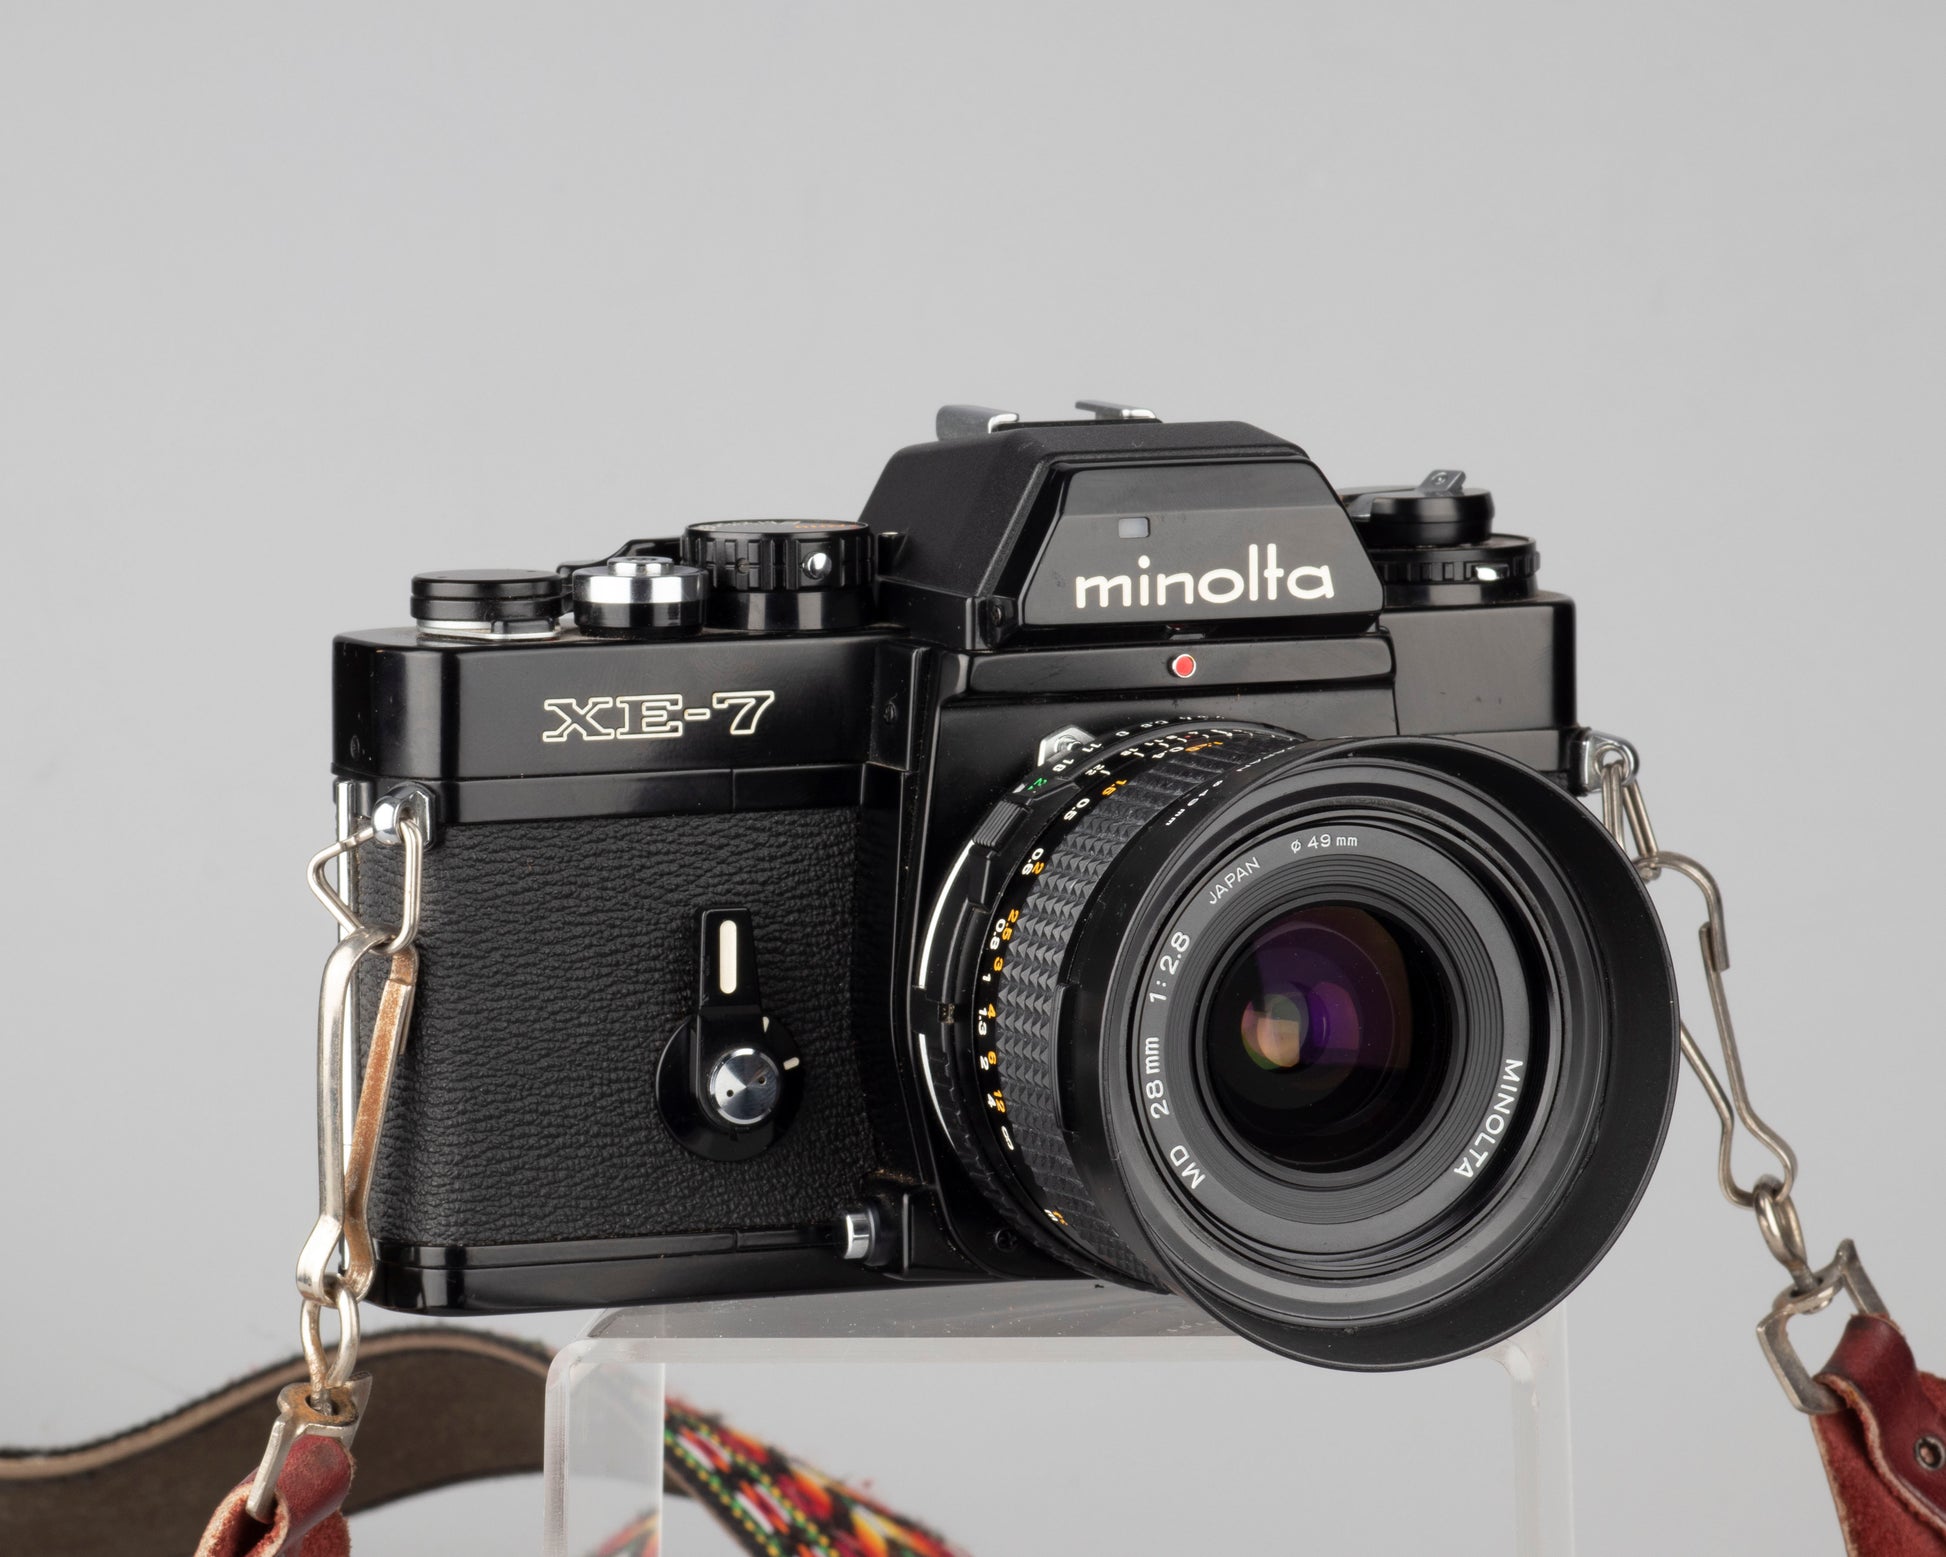 The Minolta XE-7 is a classic mid-1970s aperture-priority 35mm SLR designed in collaboration with Leica